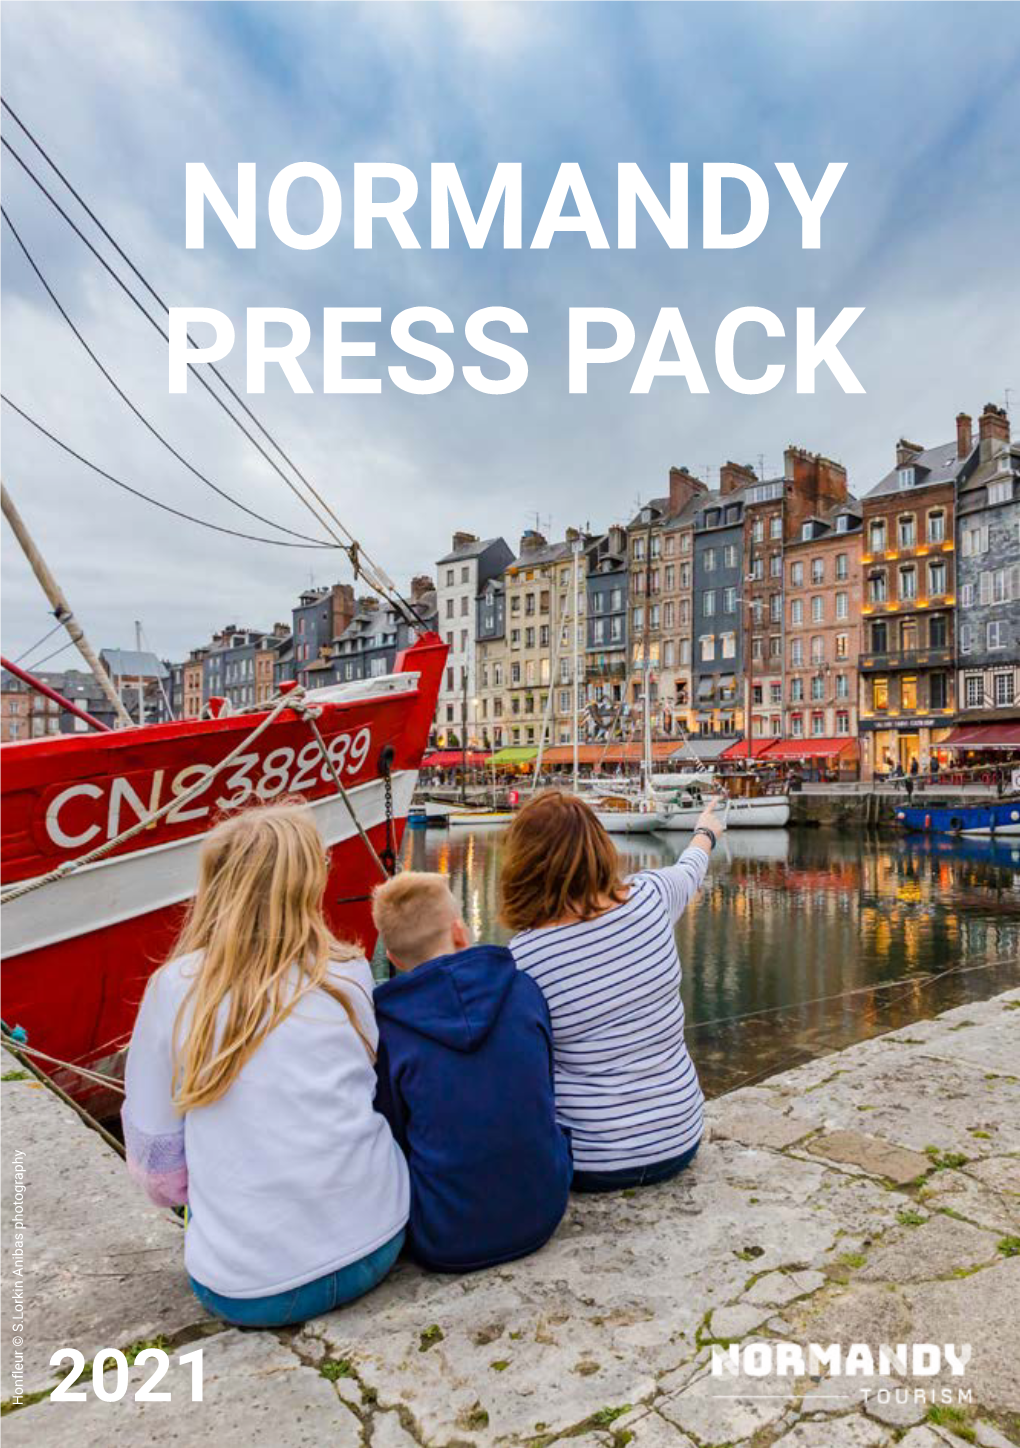 Normandy Press Pack